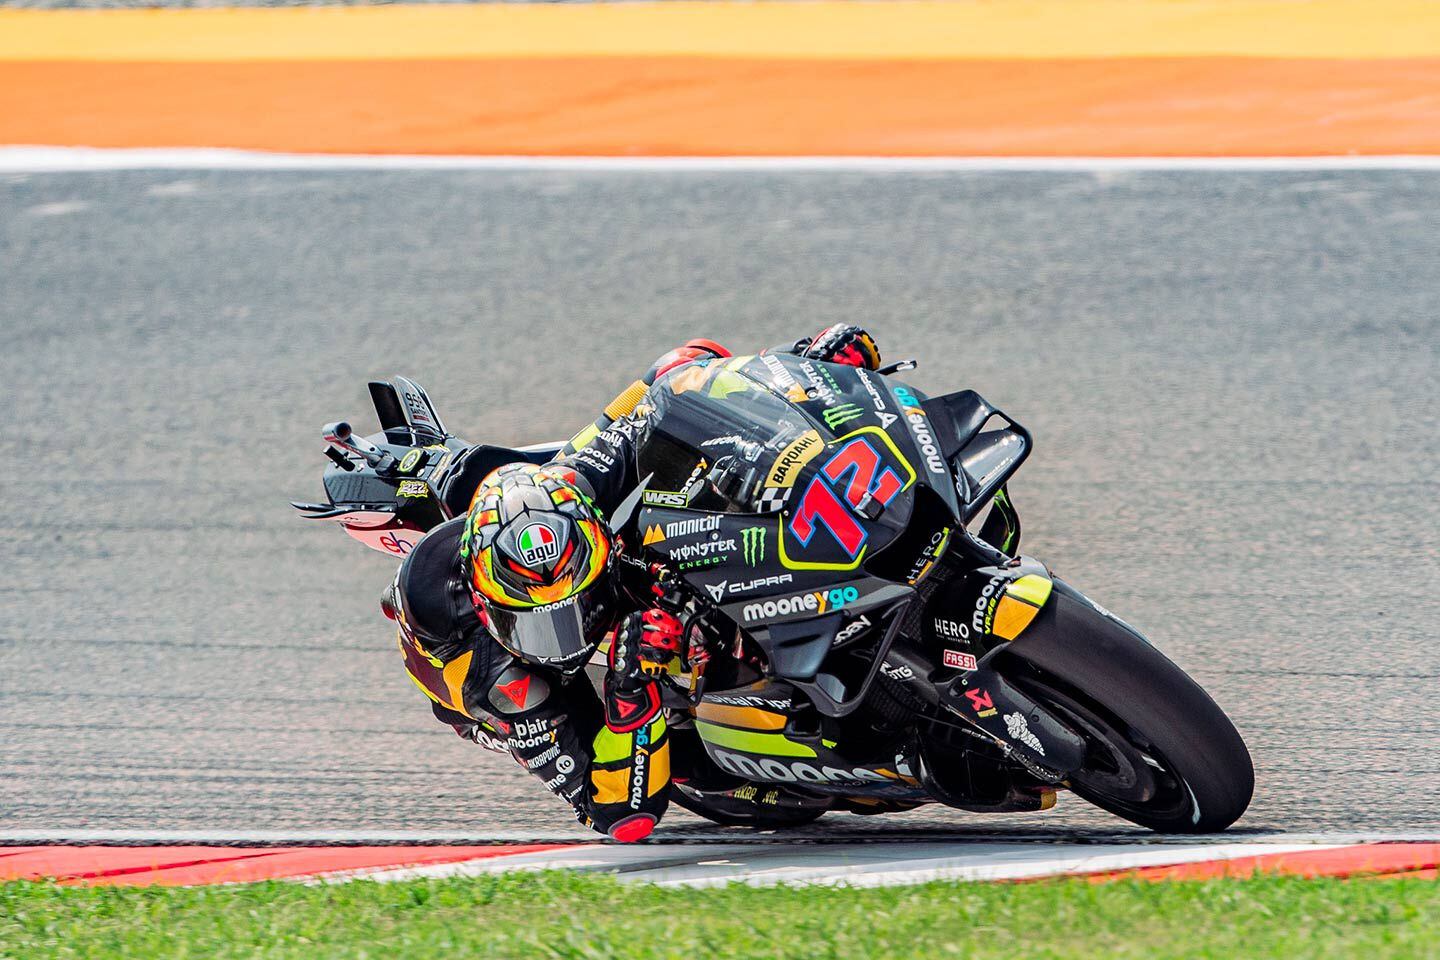 Marco Bezzecchi ran away from the field in the first-ever Indian MotoGP.